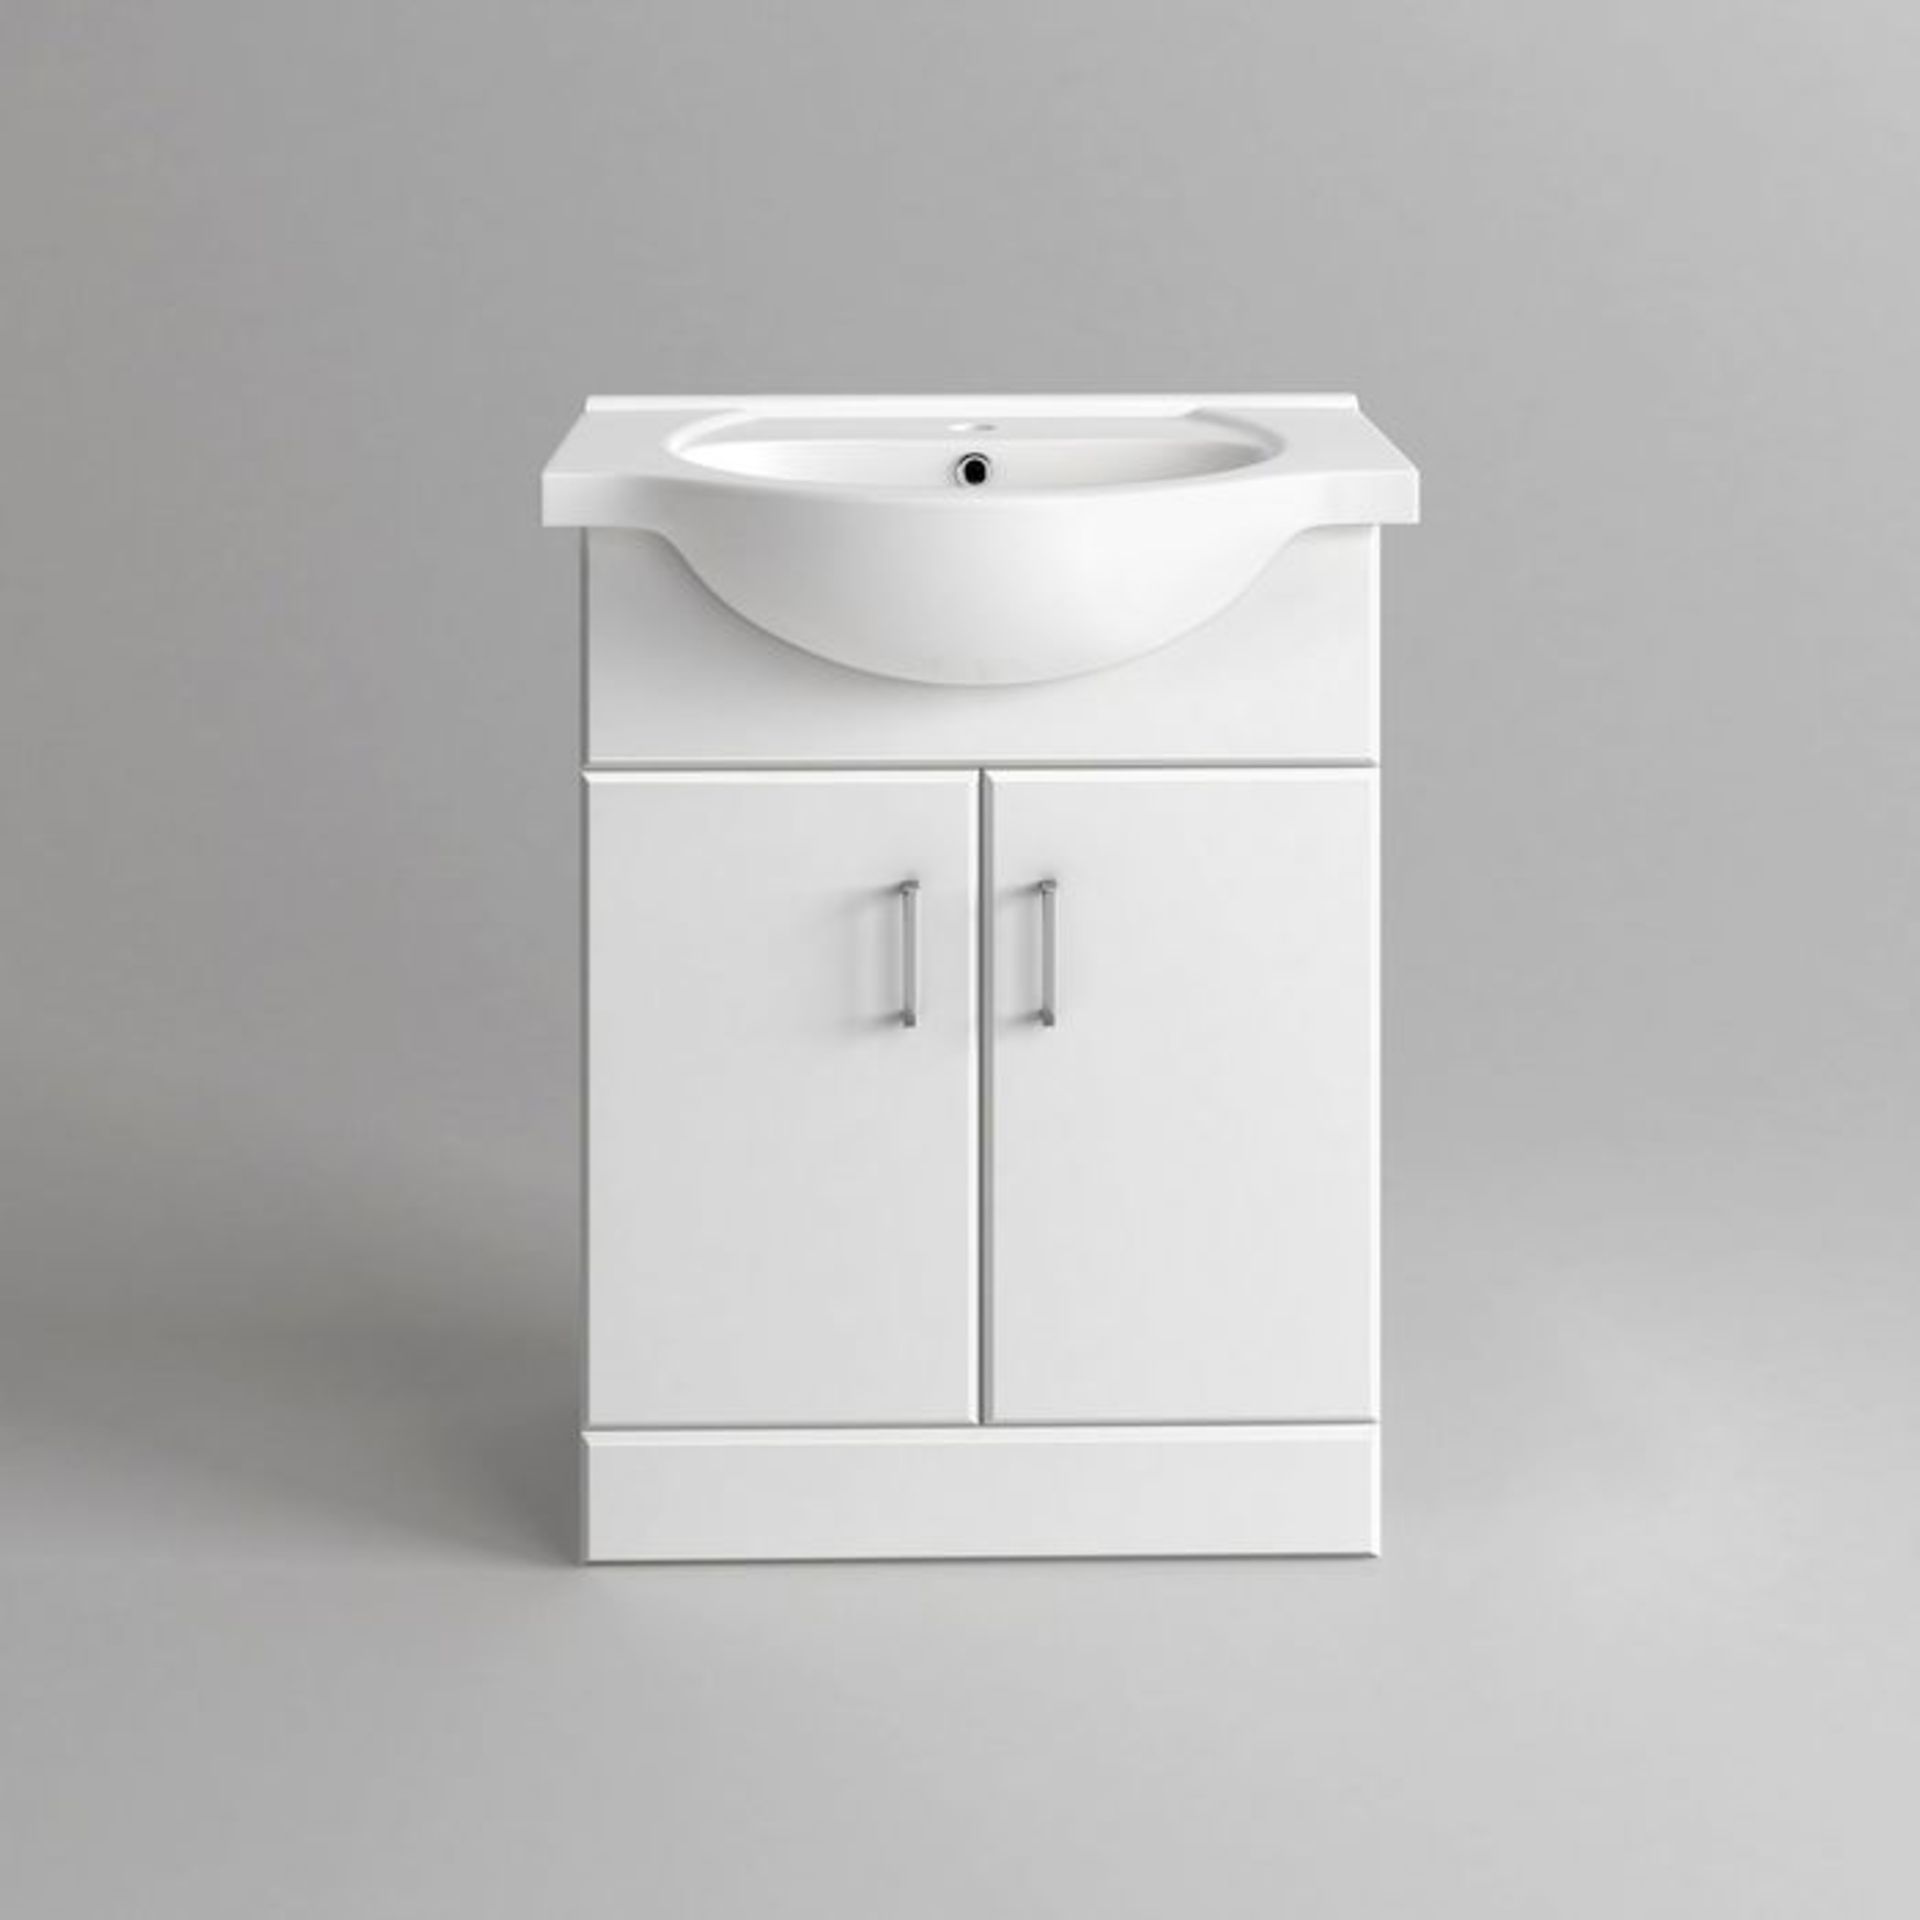 (TA201) 550x300mm Quartz Gloss White Built In Basin Cabinet. RRP £349.99. Comes complete with basin. - Image 5 of 5